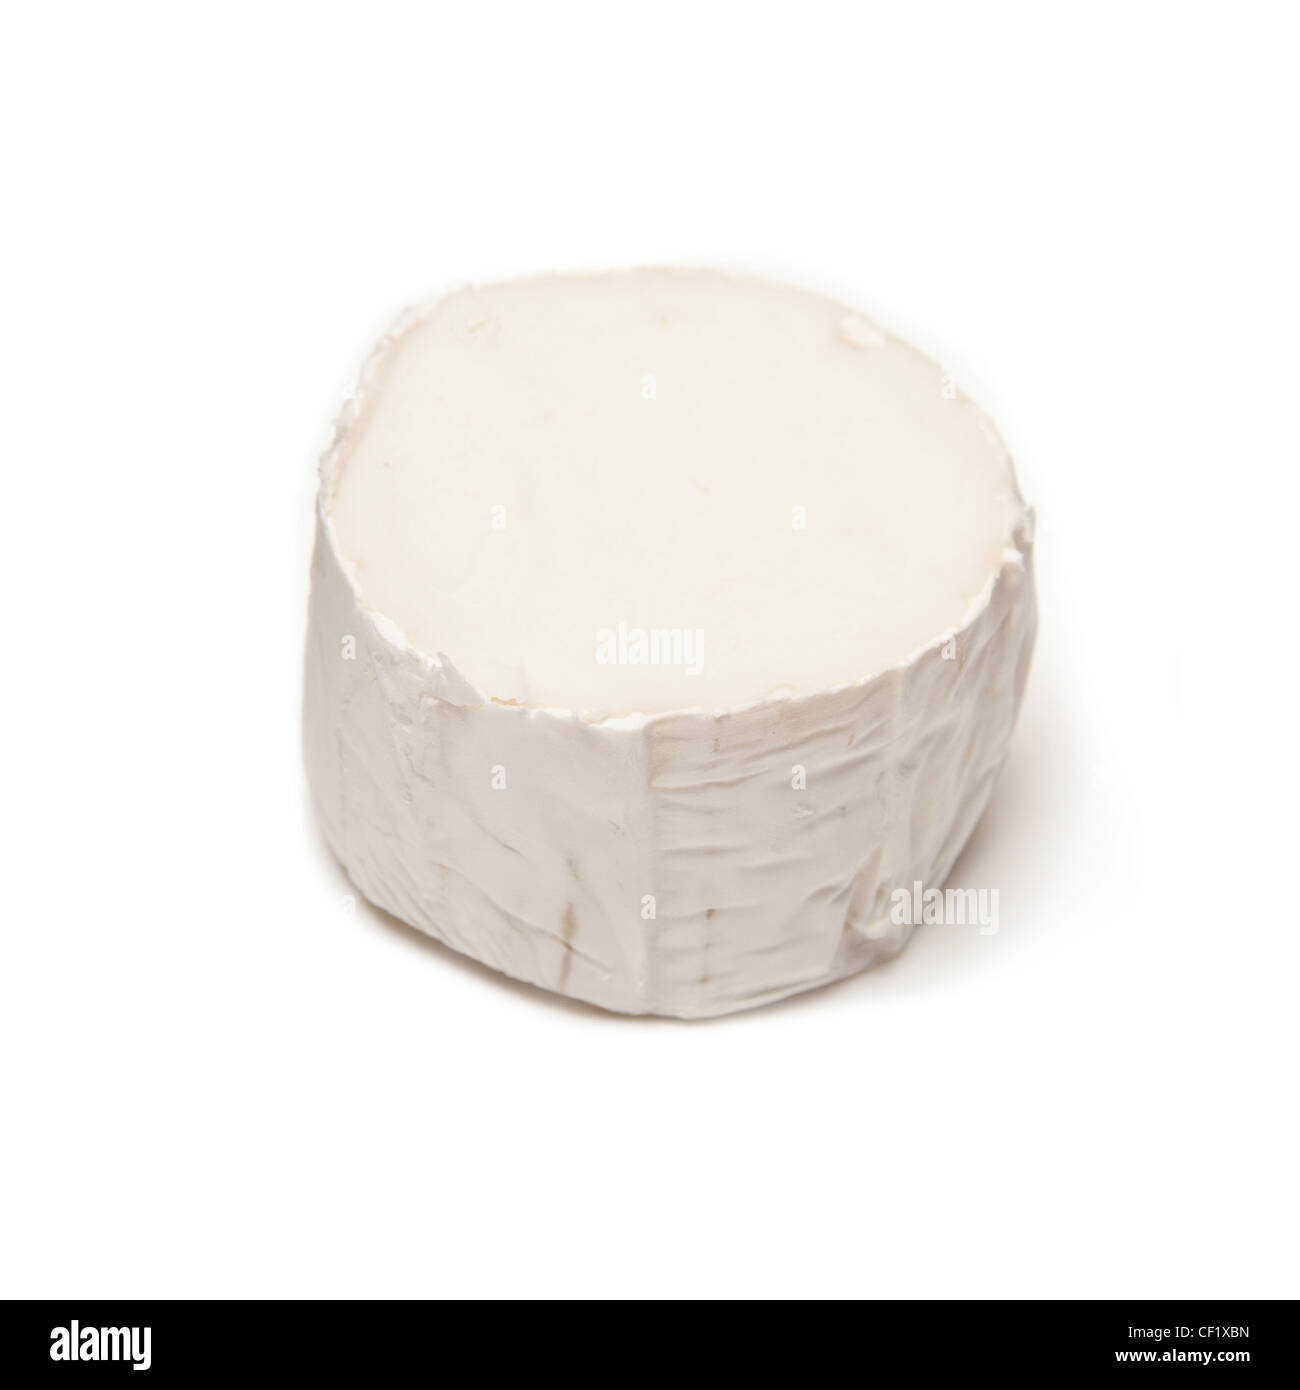 Fromage de chèvre Gevrik isolated on a white background studio. Banque D'Images